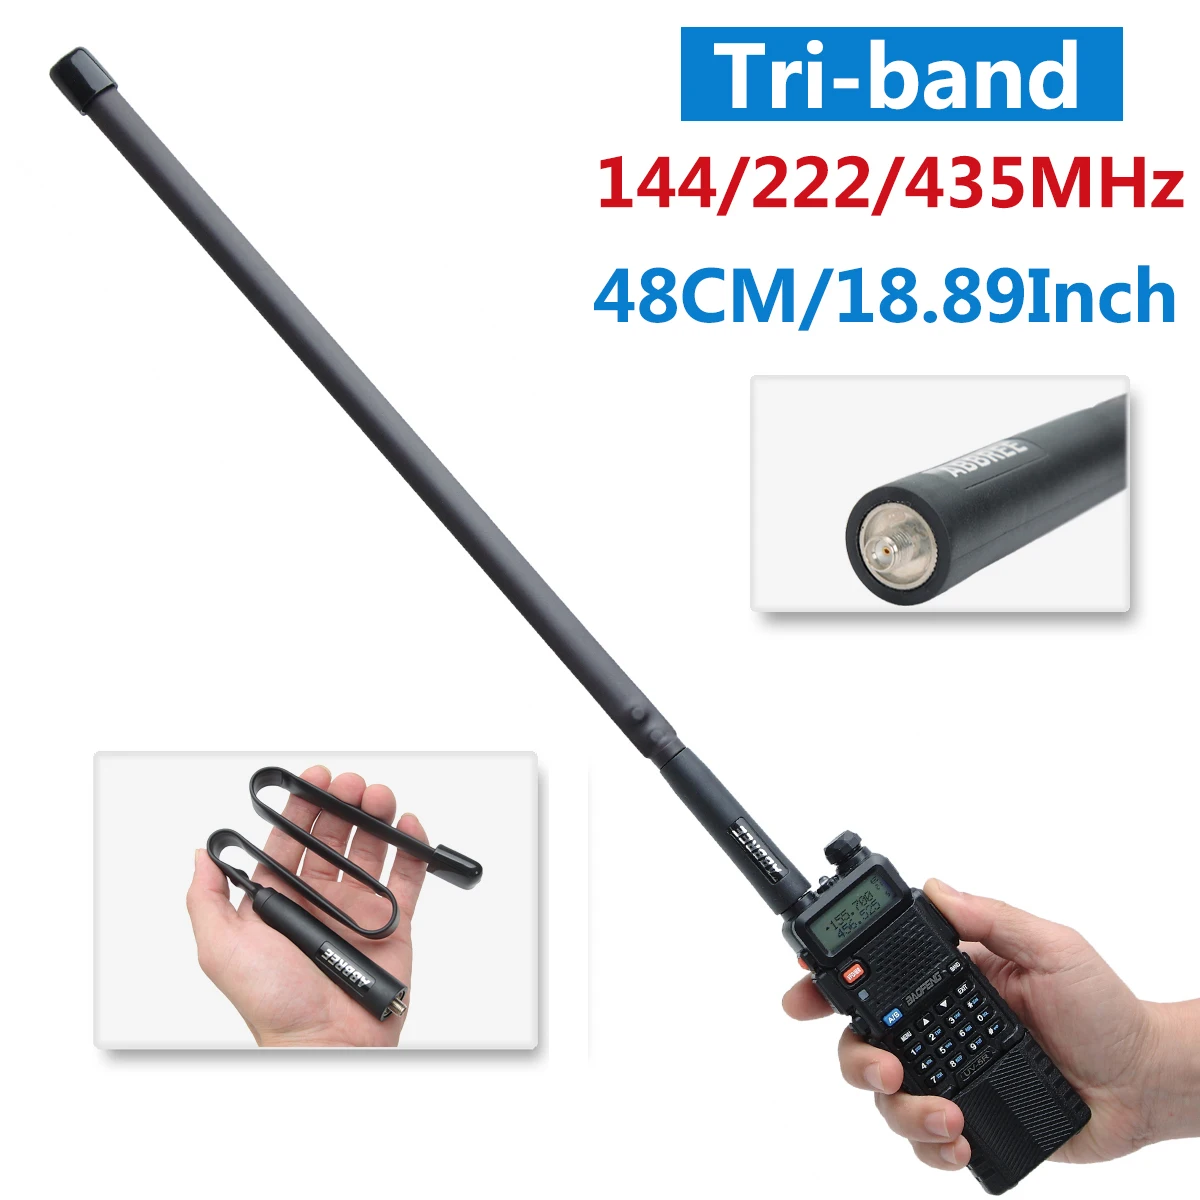 ABBREE Tri-band 144/222/435Mhz Tactical Antenna for Baofeng BF-R3 UV-82T UV-5RX3 UV-82X3,BTECH UV-5X3 Ham Walkie Talkie Radio enlarge